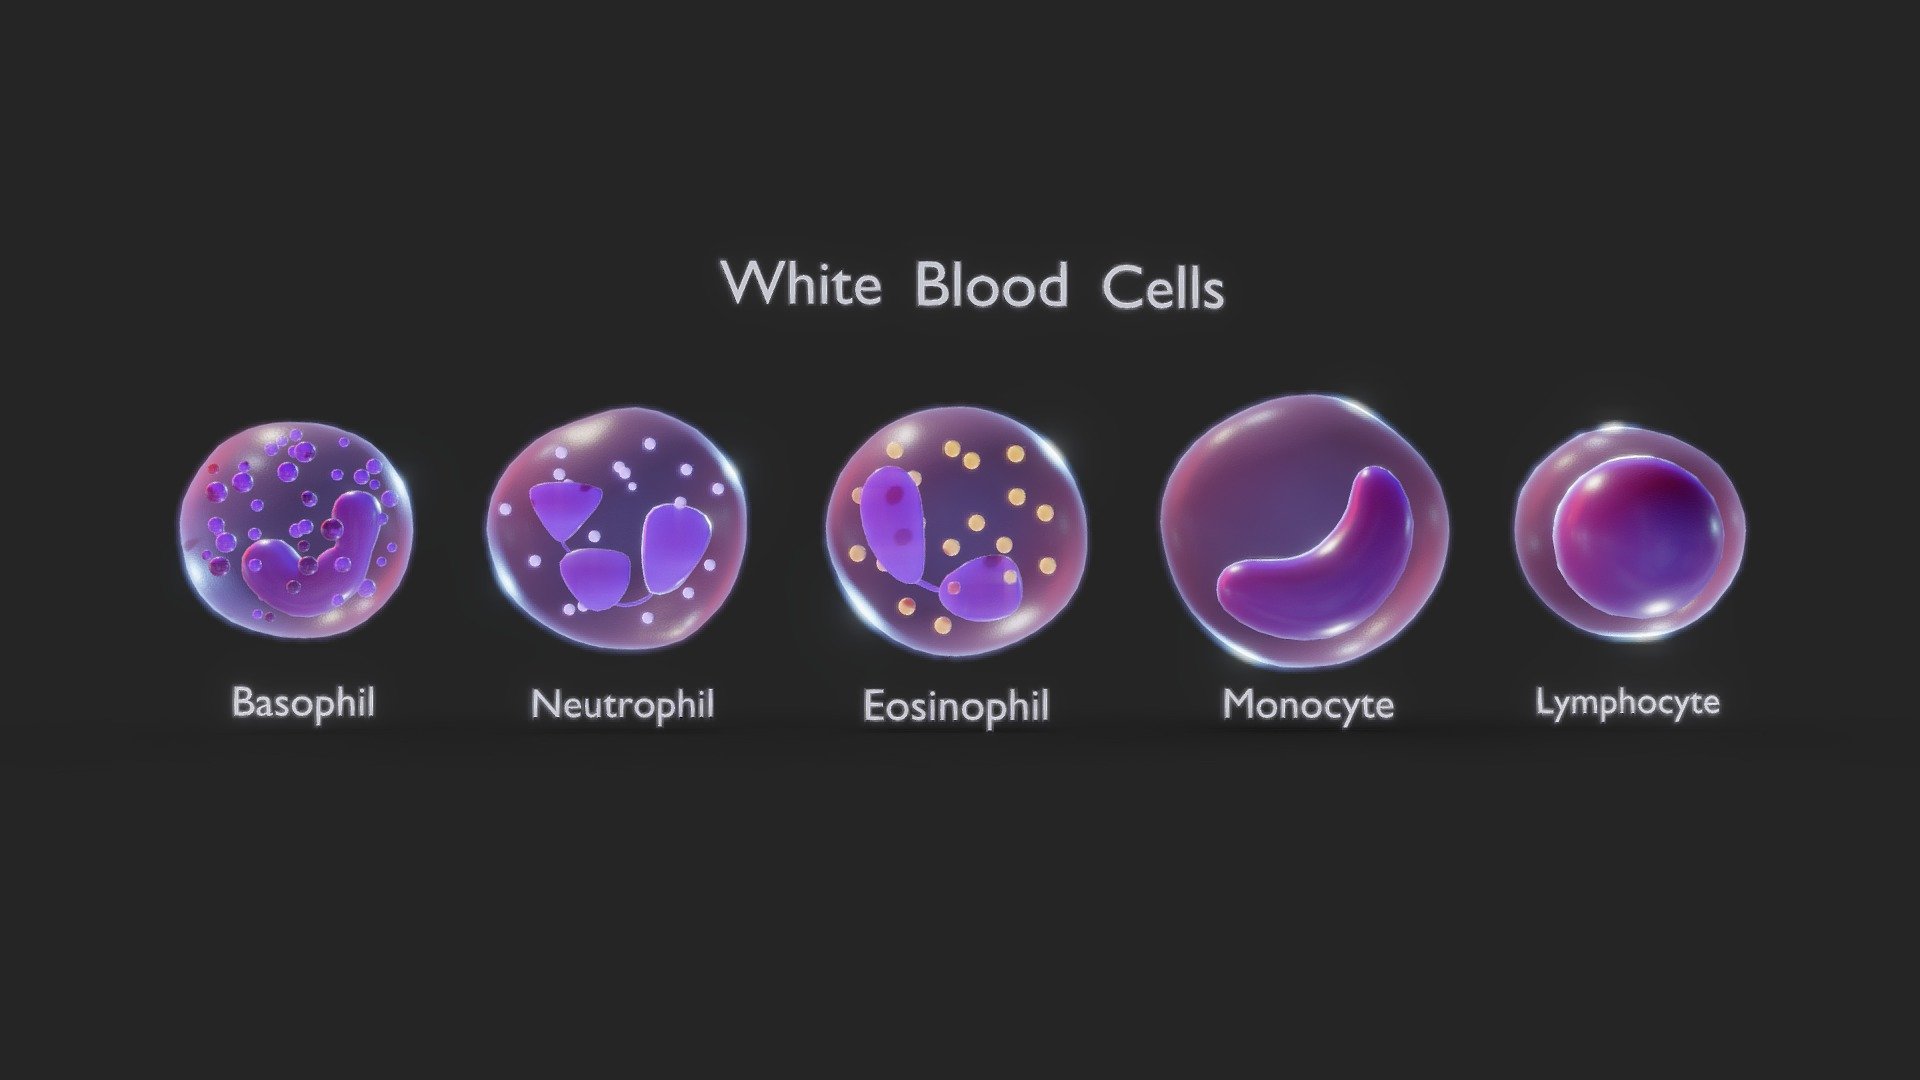 White Blood Cells

White blood cells, also known as leukocytes, are a crucial component of the immune system, responsible for defending the body against infections and foreign invaders. They come in various types, including neutrophils, lymphocytes, and monocytes, each with specific roles in the immune response.




Format: FBX, OBJ, MTL, STL, glb, glTF, Blender v3.6.1

Optimized UVs (Non-Overlapping UVs)

PBR Textures | 1024x1024 - 2048x2048 - 4096x4096 | (1K, 2K, 4K - Jpeg)

Base Color (Albedo)

Normal Map

AO Map

Metallic Map

Roughness Map

Height Map

Opacity Map
 - White Blood Cells - Buy Royalty Free 3D model by Nima (@h3ydari96) 3d model